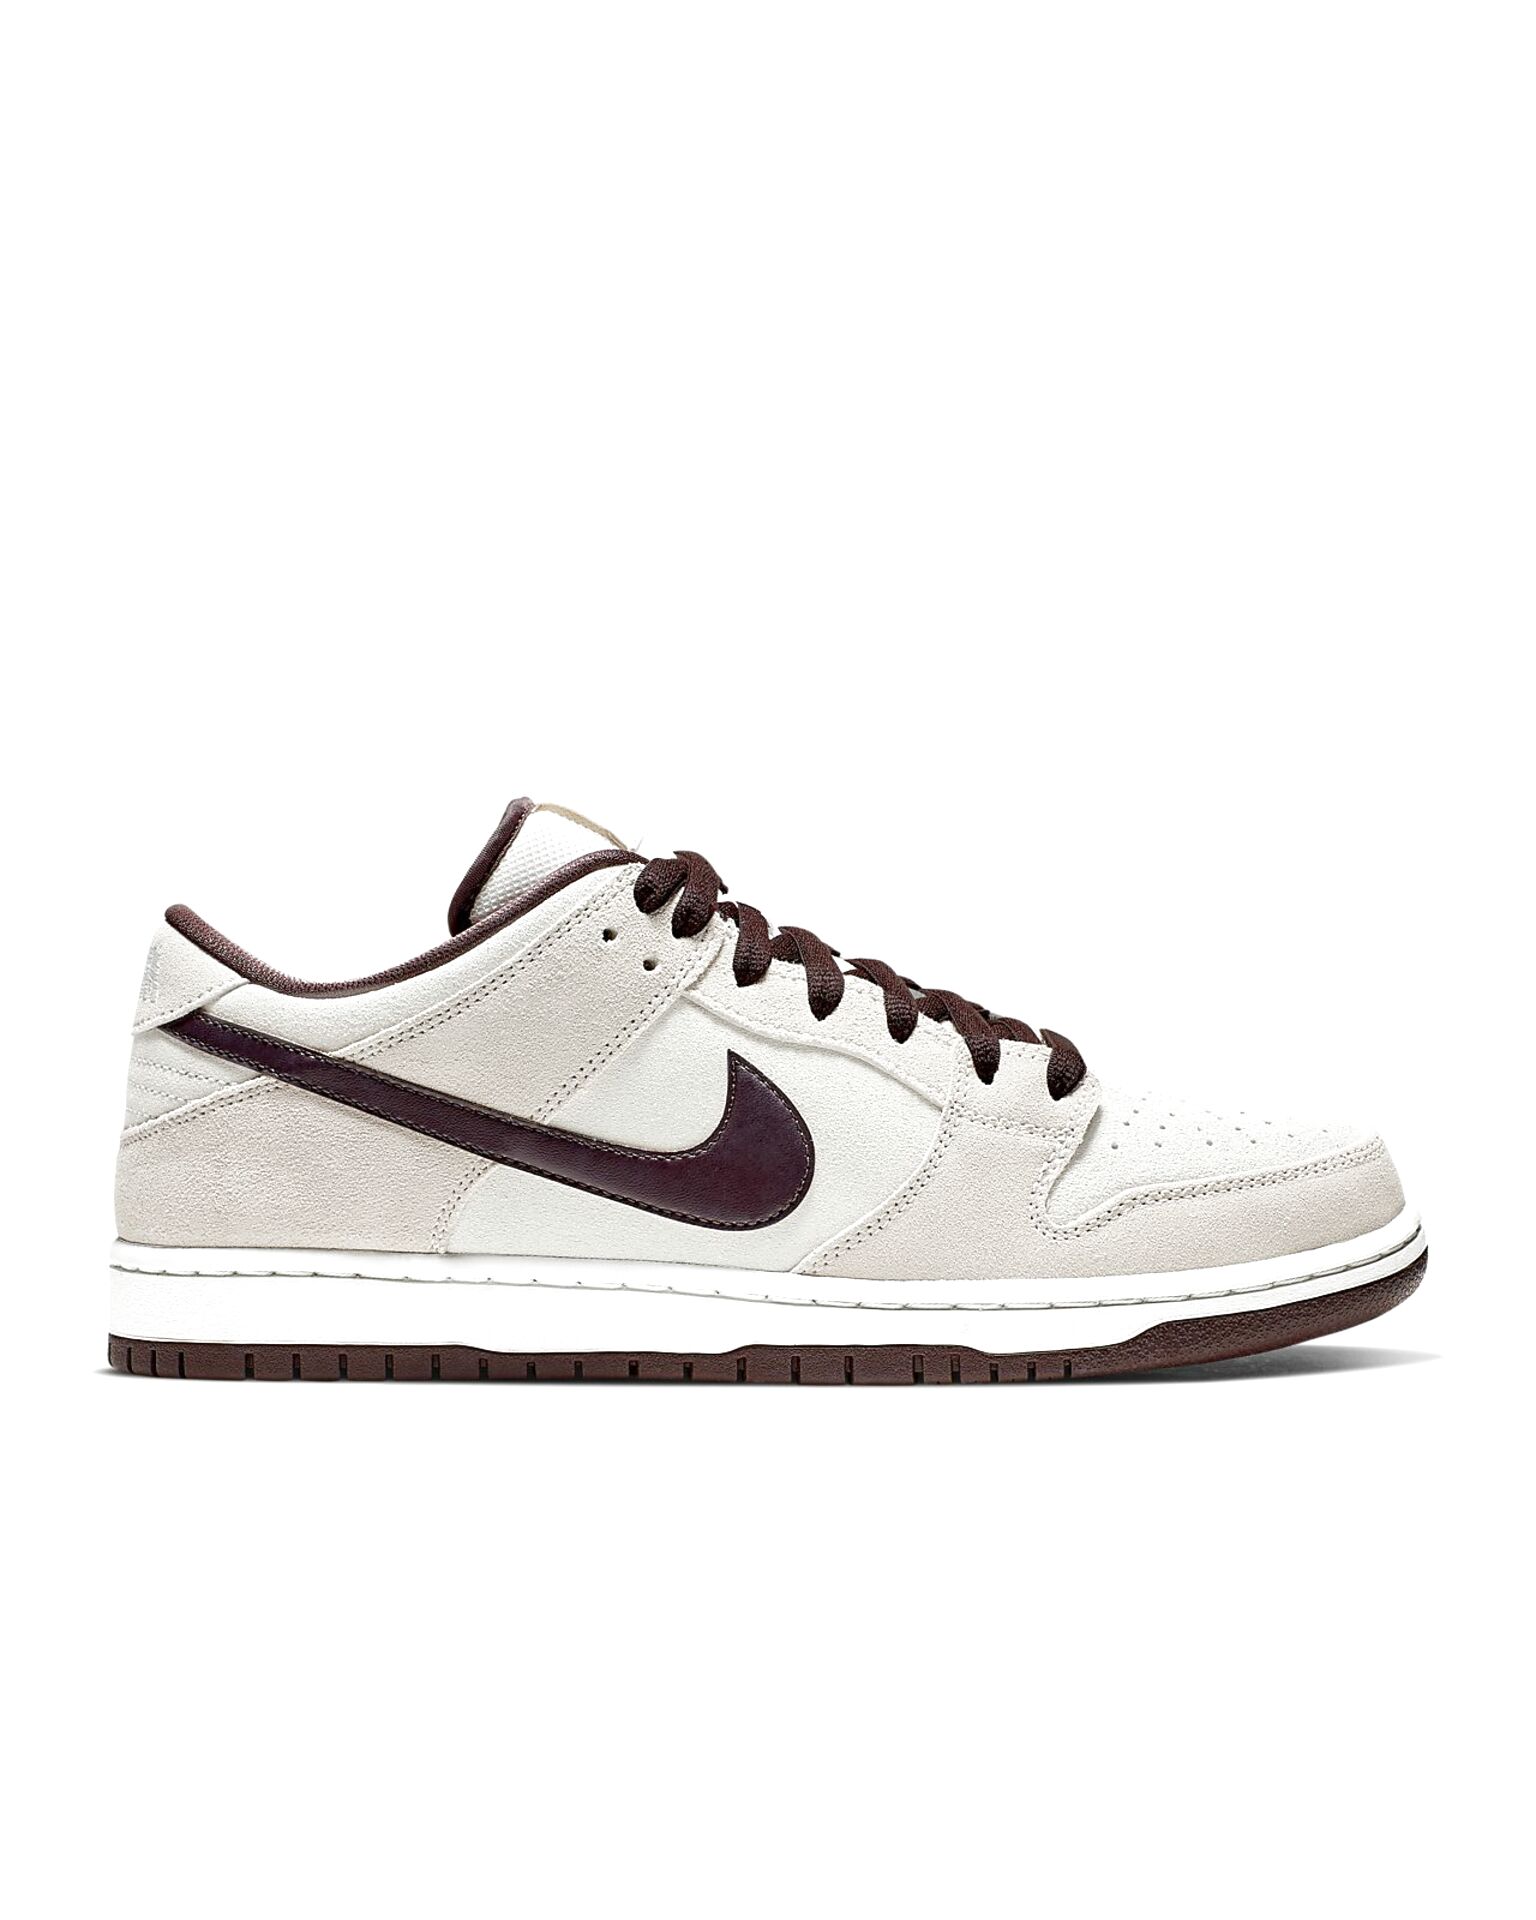 Nike Dunks for sale in UK | 91 used Nike Dunks